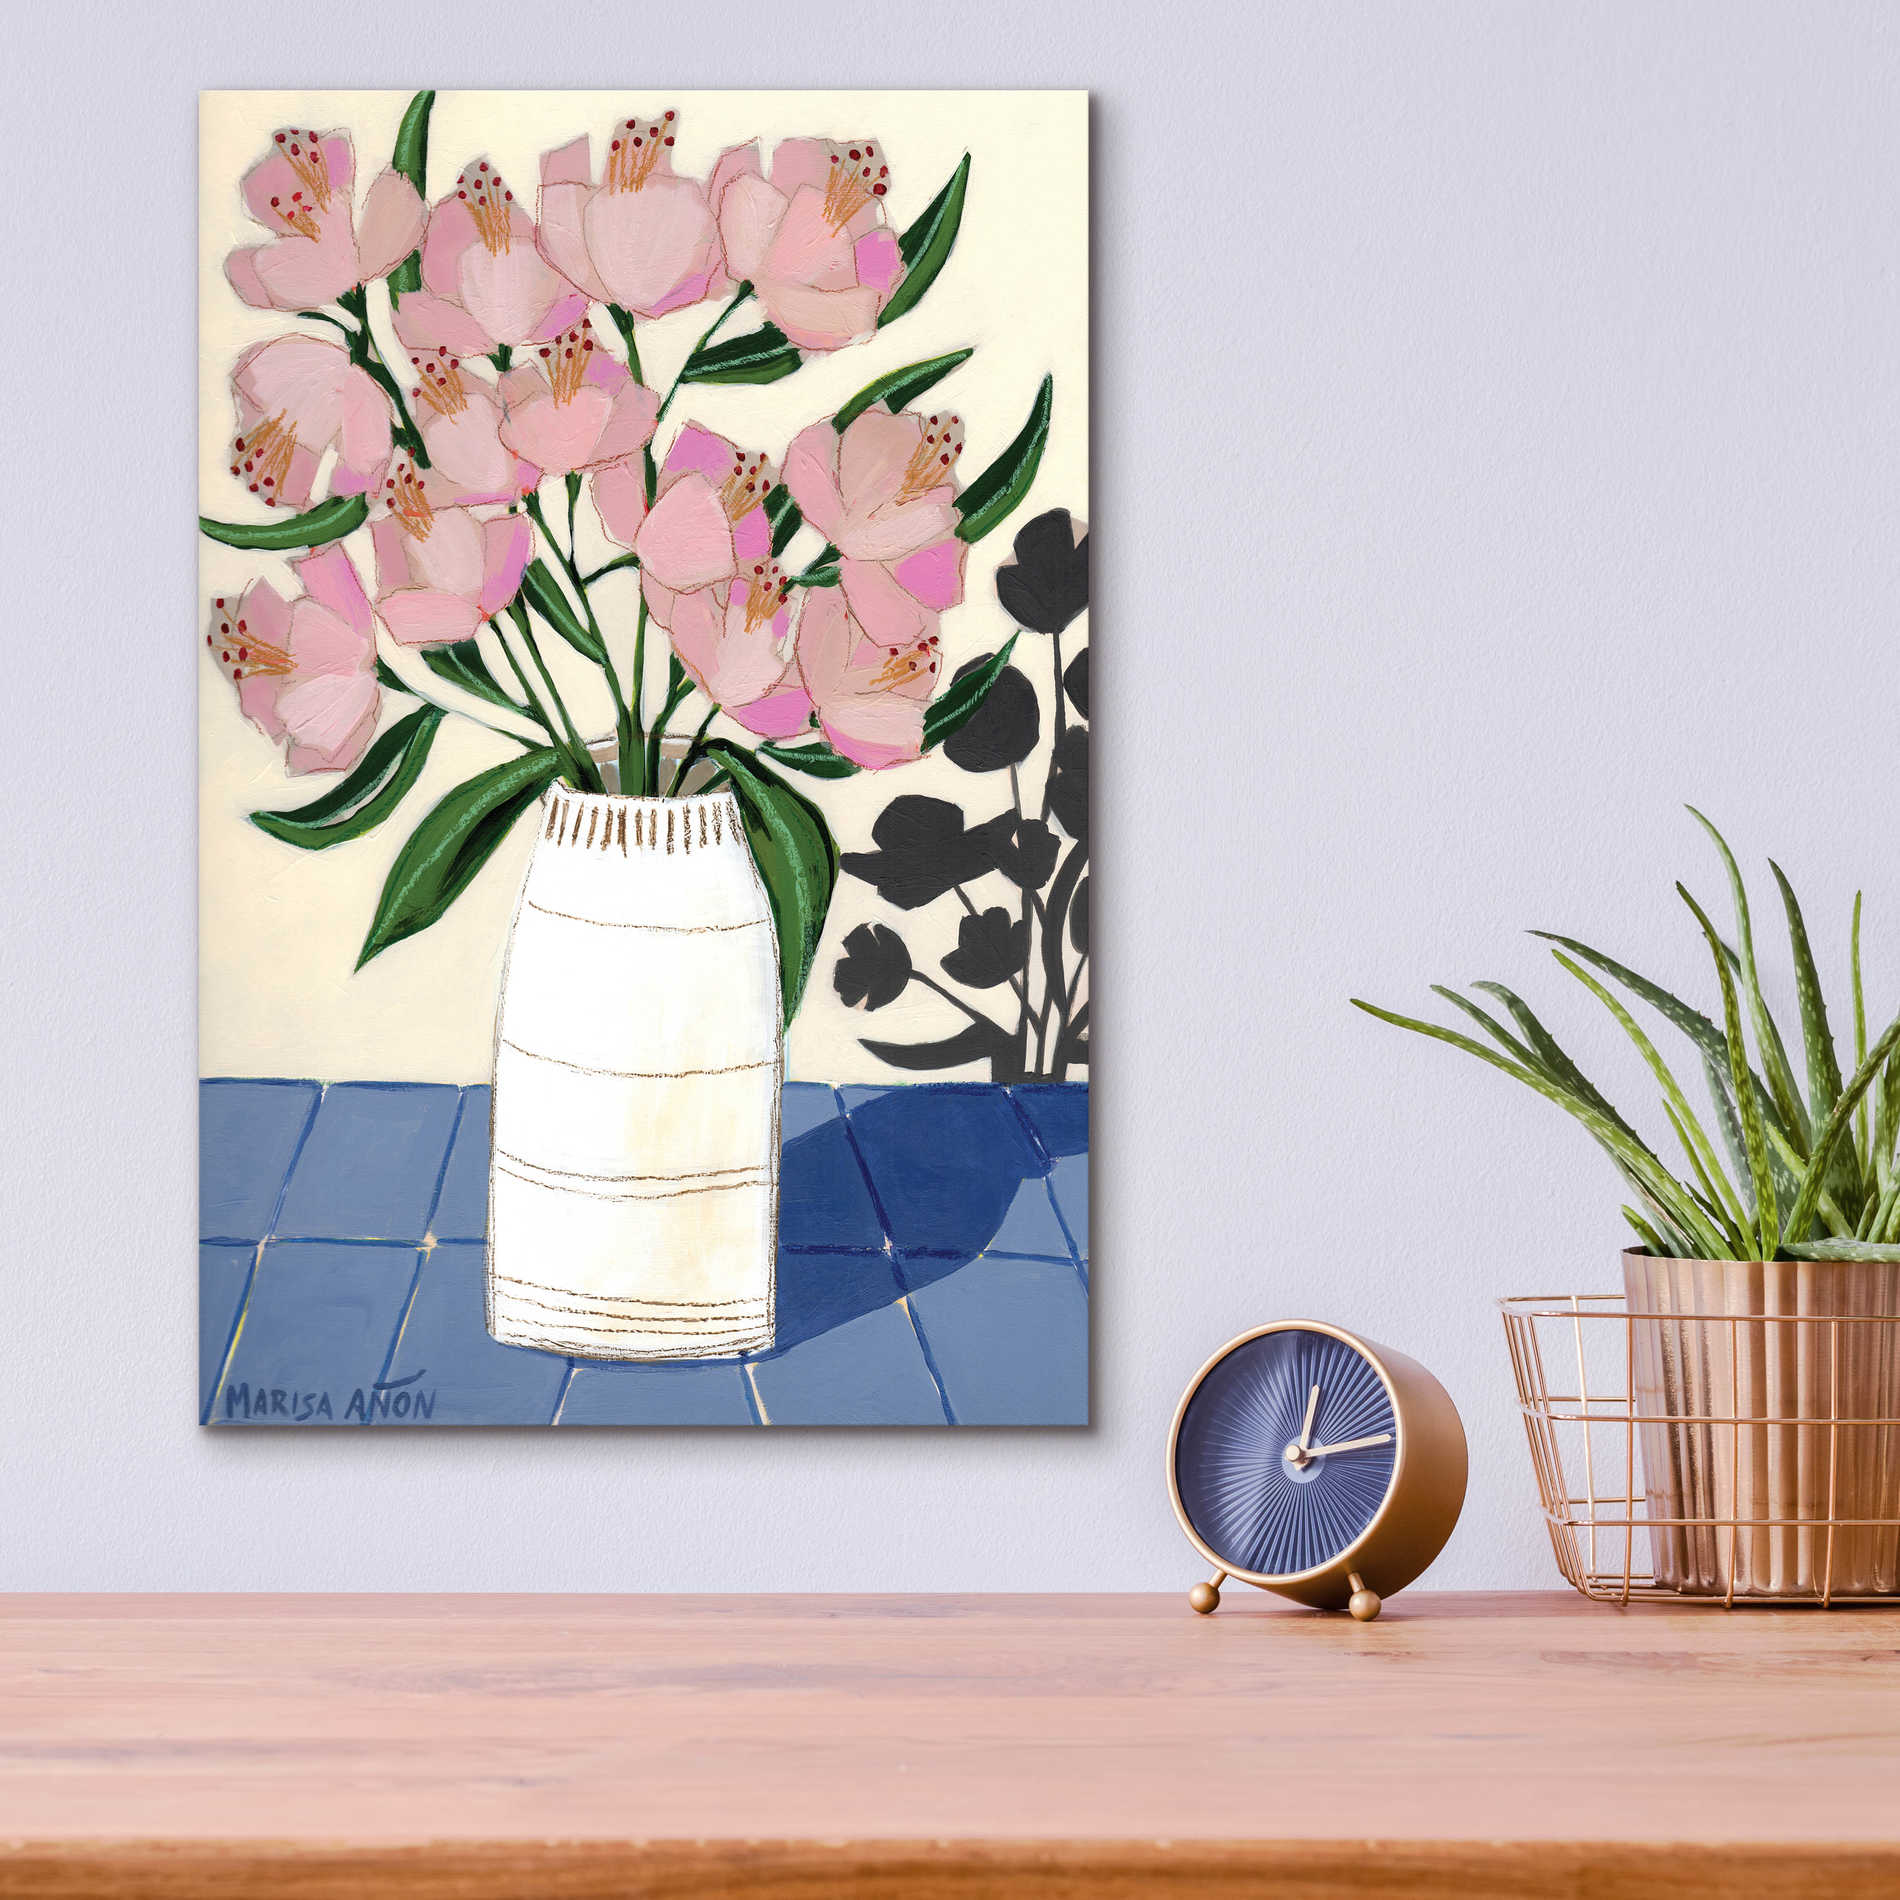 Epic Art 'Spring Florals 5' by Marisa Anon, Acrylic Glass Wall Art,12x16